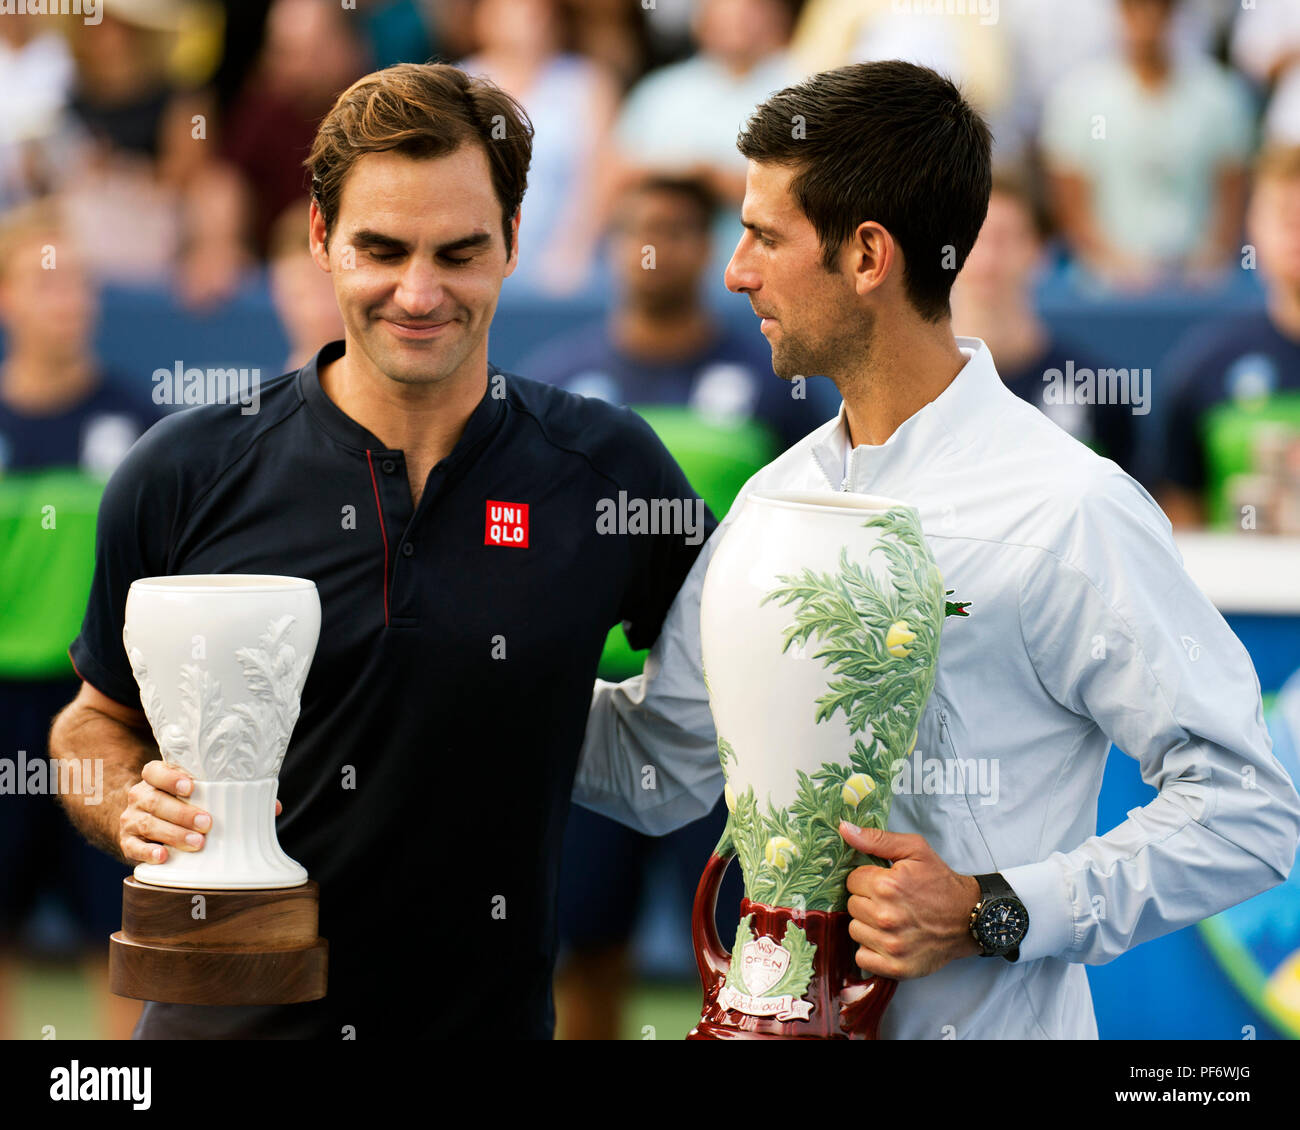 Mason, Ohio, USA. August 19, 2018: Roger Federer (SUI) and Novak Djokovic (SRB) during the award ceremony at the Western Southern Open in Mason, Ohio, USA. Brent Clark/Alamy Live News Stock Photo